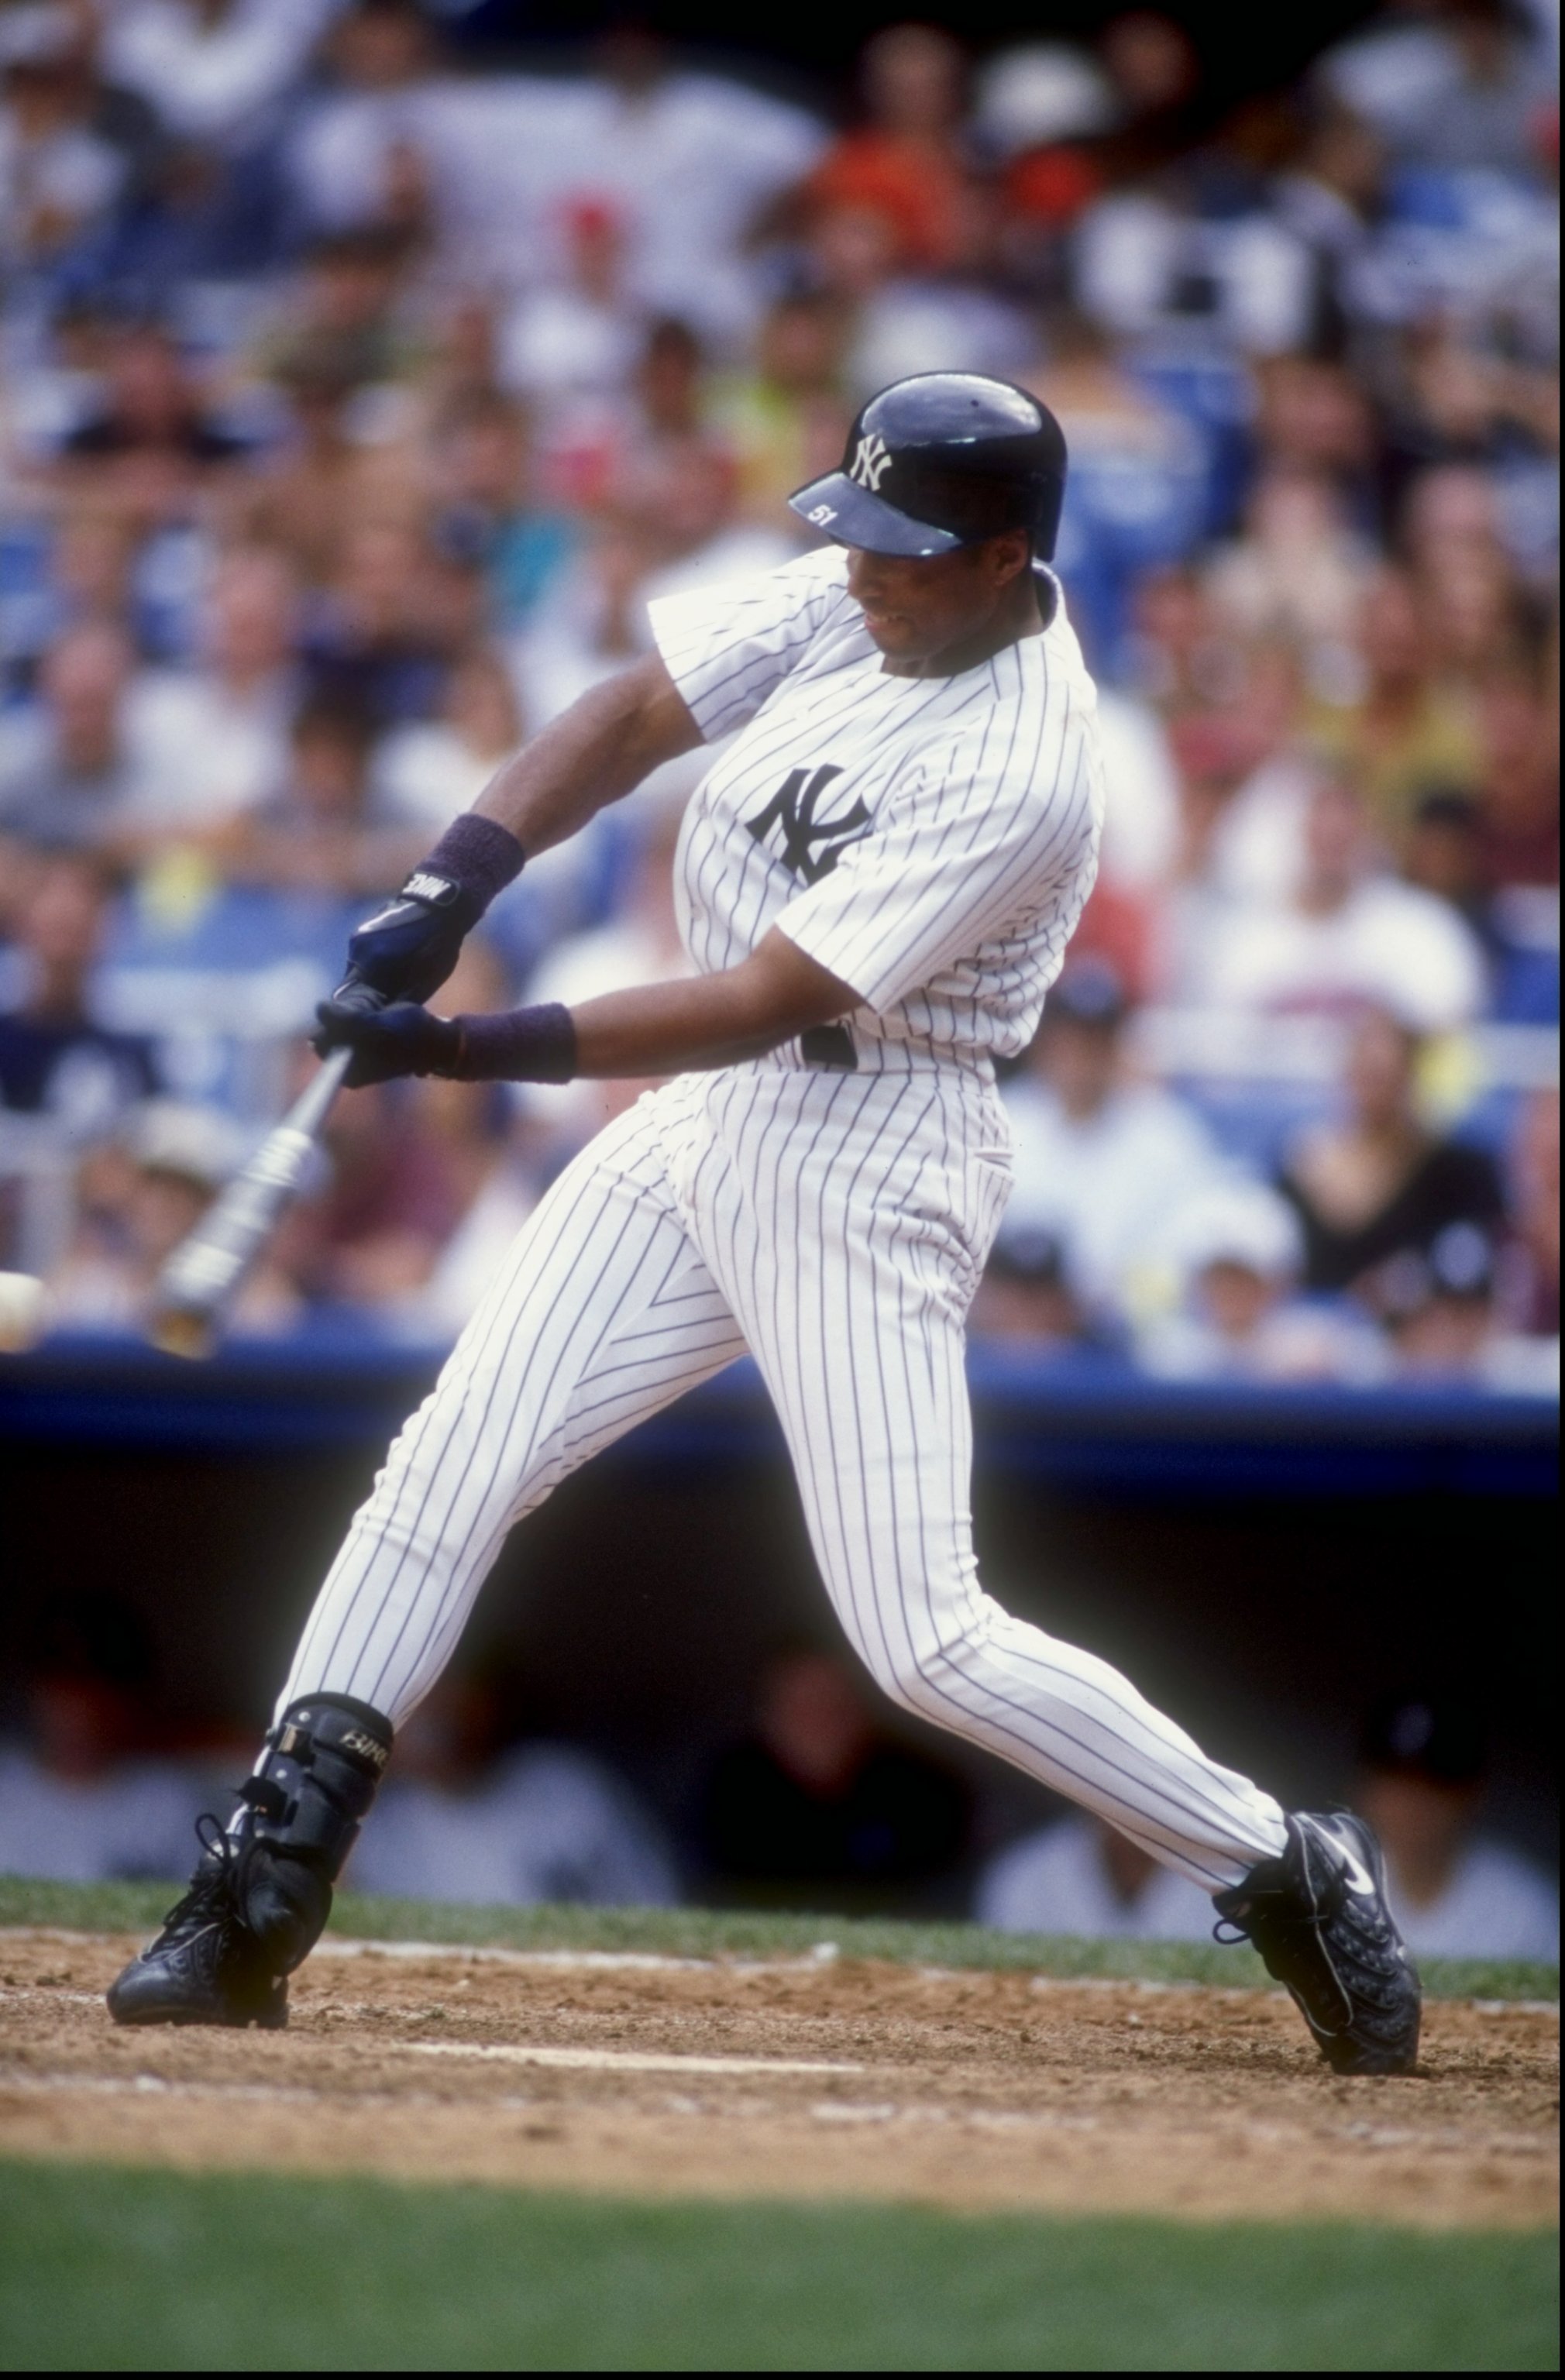 26 Aug 1998:  Bernie Williams #51 of the New York Yankees swings at a pitch during a game against the Anaheim Angels at Yankee Stadium in the Bronx, New York. The Angels defeated the Yankees 6-4.